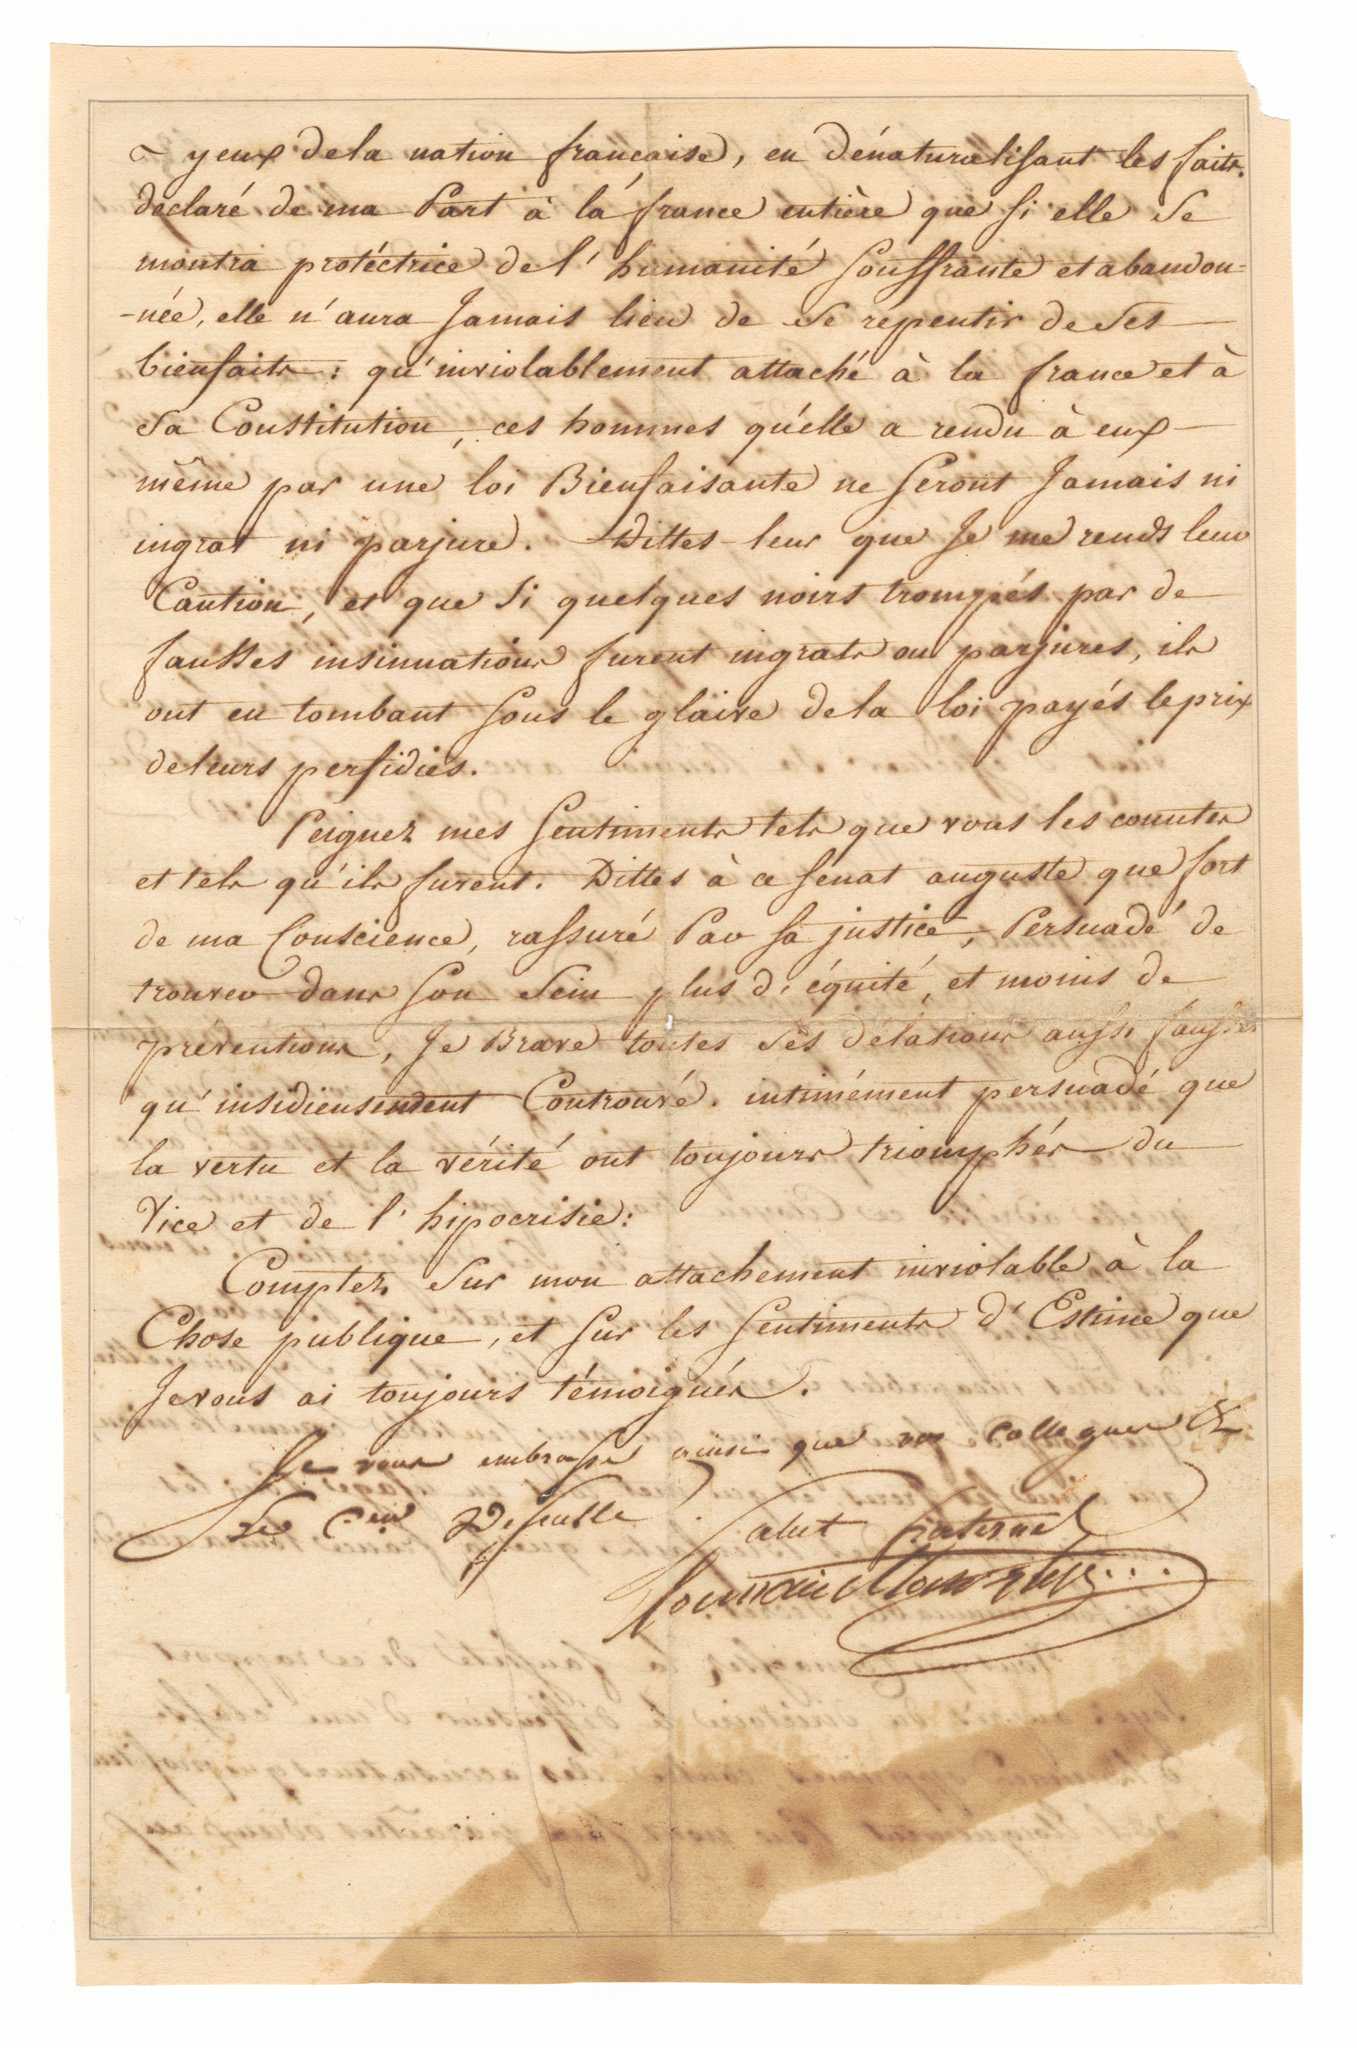 A letter signed by Toussaint Louverture to Charles Humbert Marie Vincent from Cap-Français (now Cap-Haïtien), Haiti, on October 21, 1797. The text itself was recorded by a scribe as Louverture's written French was limited, though the content comprises his own thoughts. At the top of the first page is pre-printed letterhead for Toussaint Louverture, Chief General of the Army of Saint-Domingue. The letter is handwritten in black ink on the front and back sides of two (2) sheets of paper. The contents of the letter are in regards to ongoing conflicts in the French colony of Saint Domingue, later the free nation of Haiti, and military leader Louverture's dissatisfaction with a speech given in the French parliament earlier in 1797 in which Viénot de Vaublanc spoke against abolition and people of African descent as uncivilized.